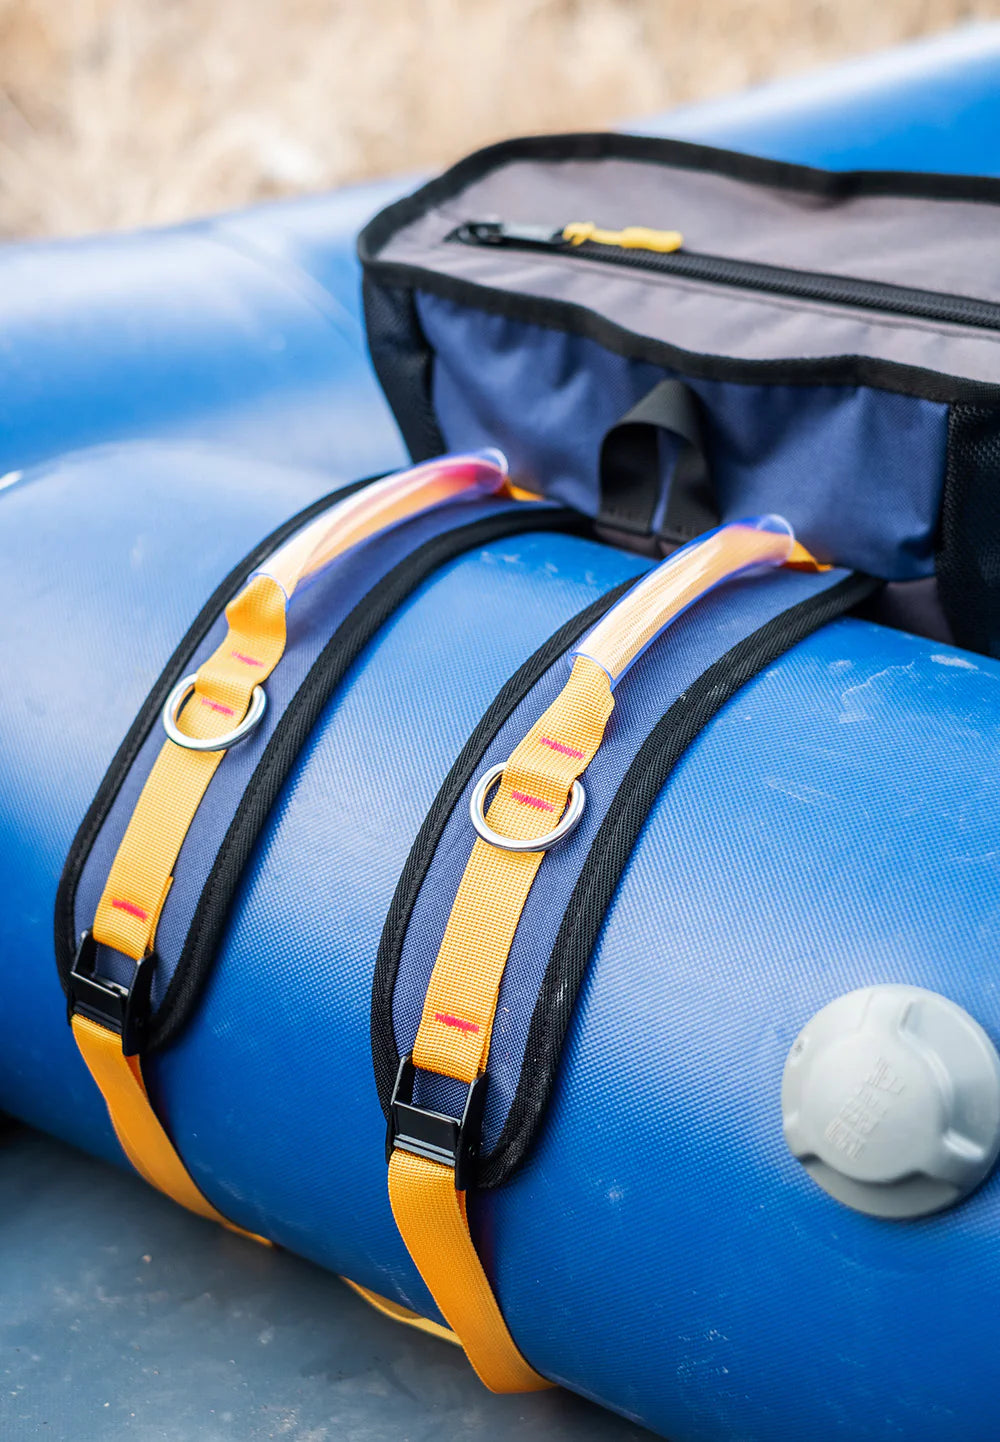 A close-up of a blue inflatable raft with a River Station Gear Thwart Bag - Rafting Mesh Gear Bag, featuring a YKK zipper, secured on top.